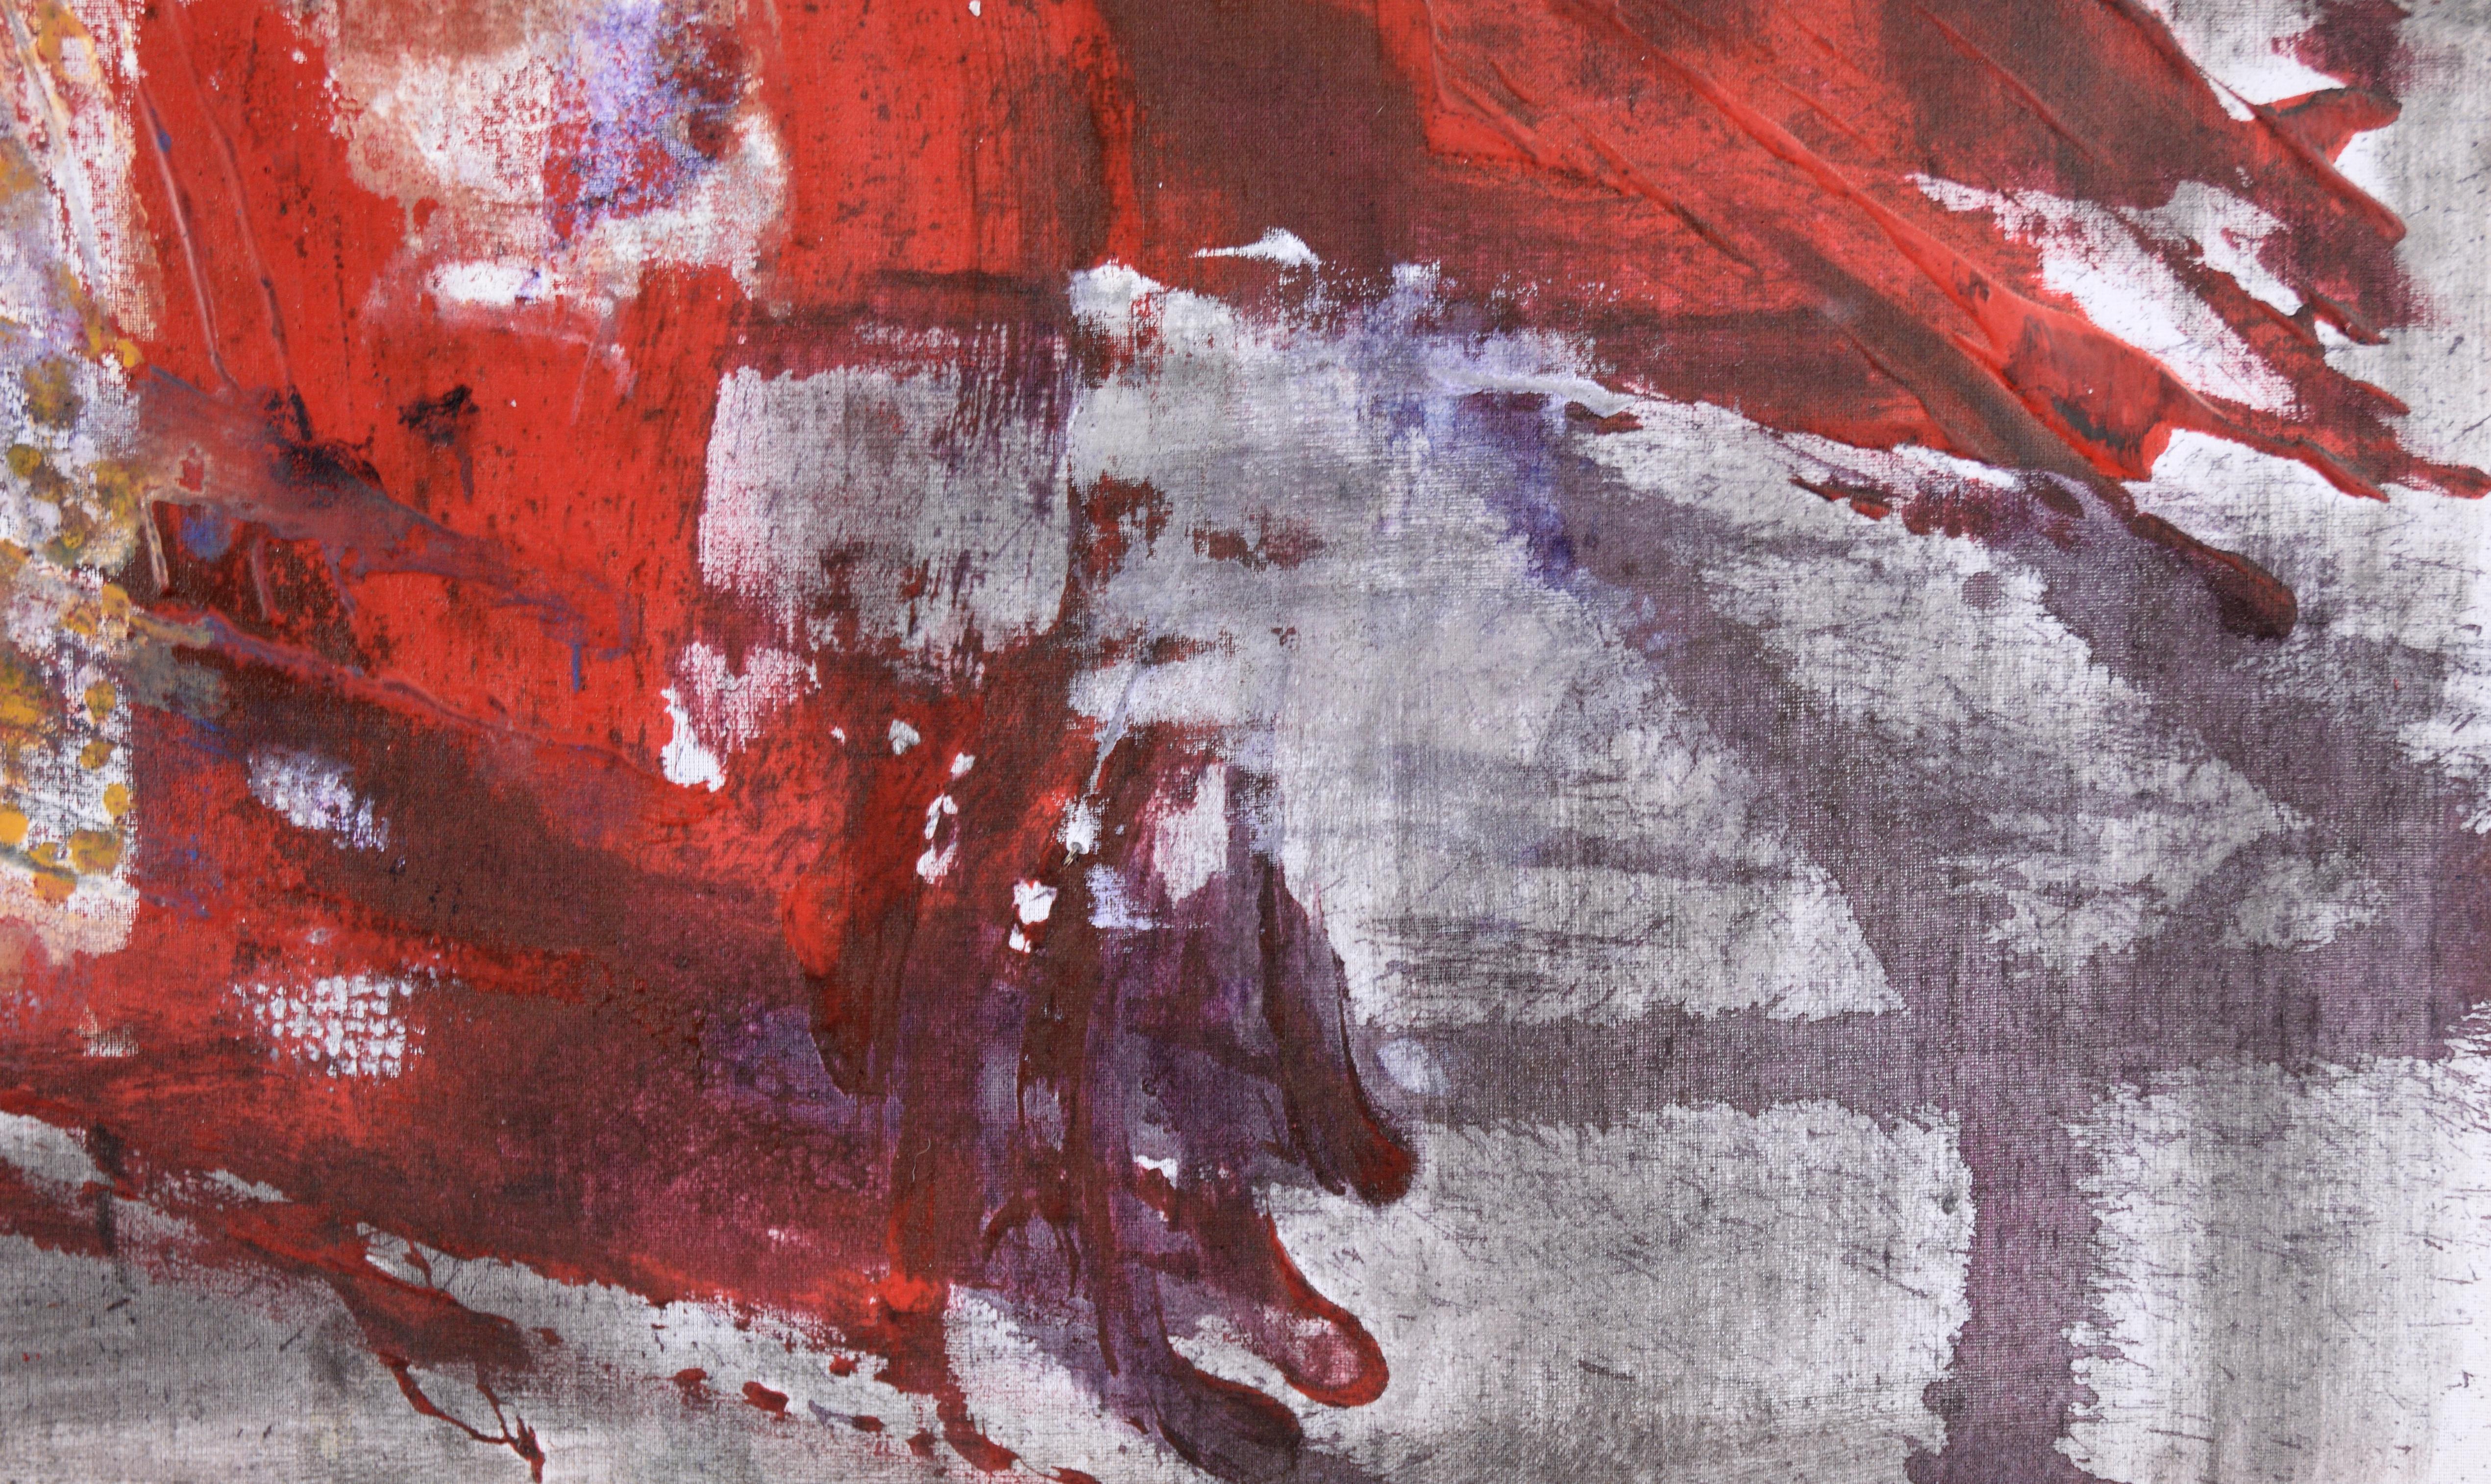 Red Splatters on  Grey Field - Abstract Expressionist in Acrylic on Linen - Gray Abstract Painting by D Whalen